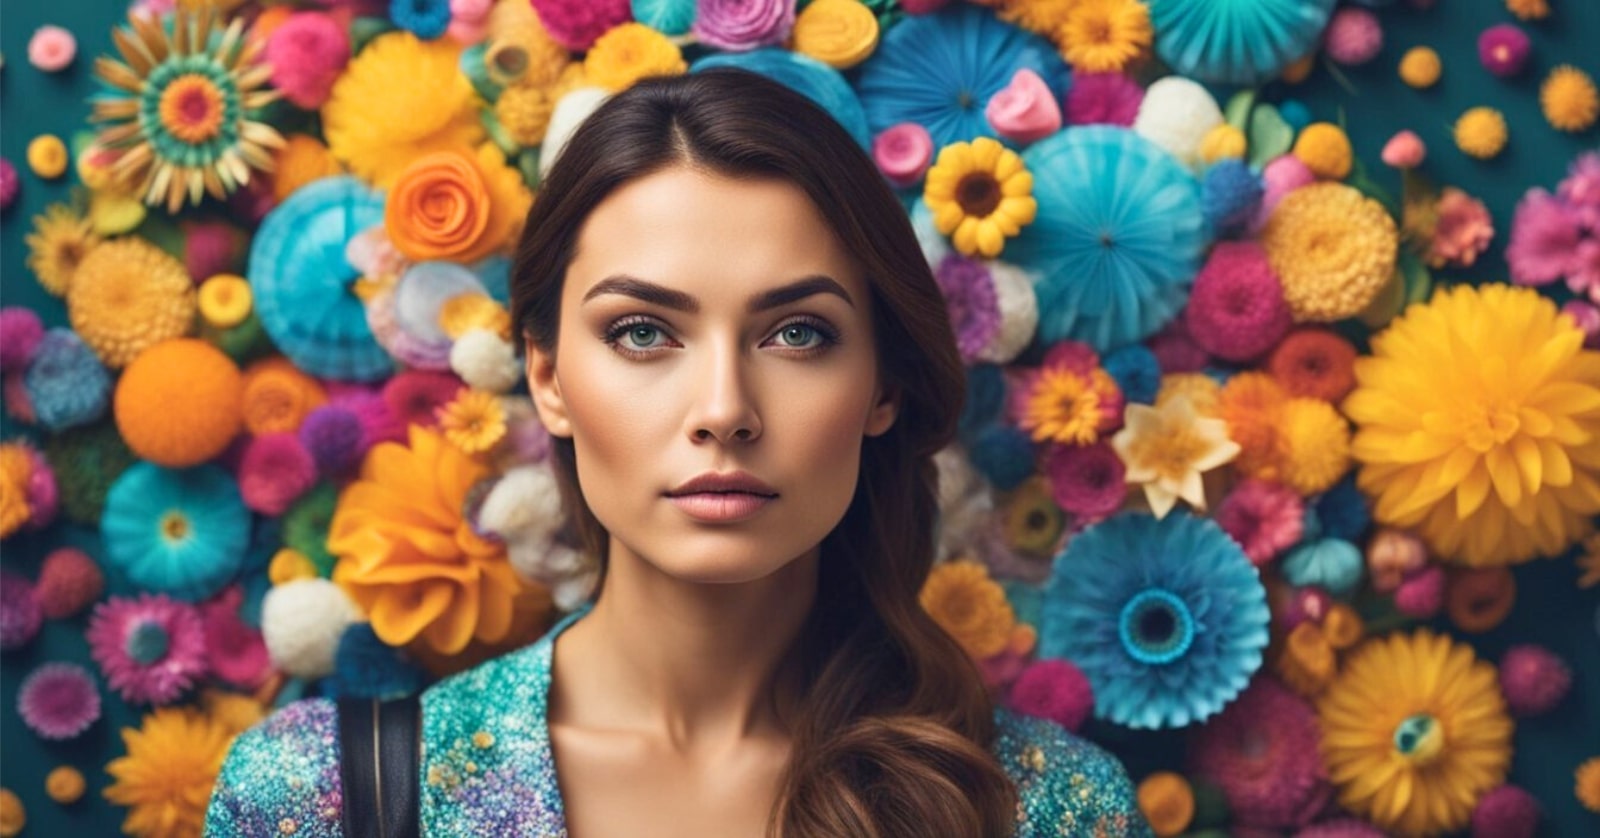 creative looking lady against backdrop of colorful flowers